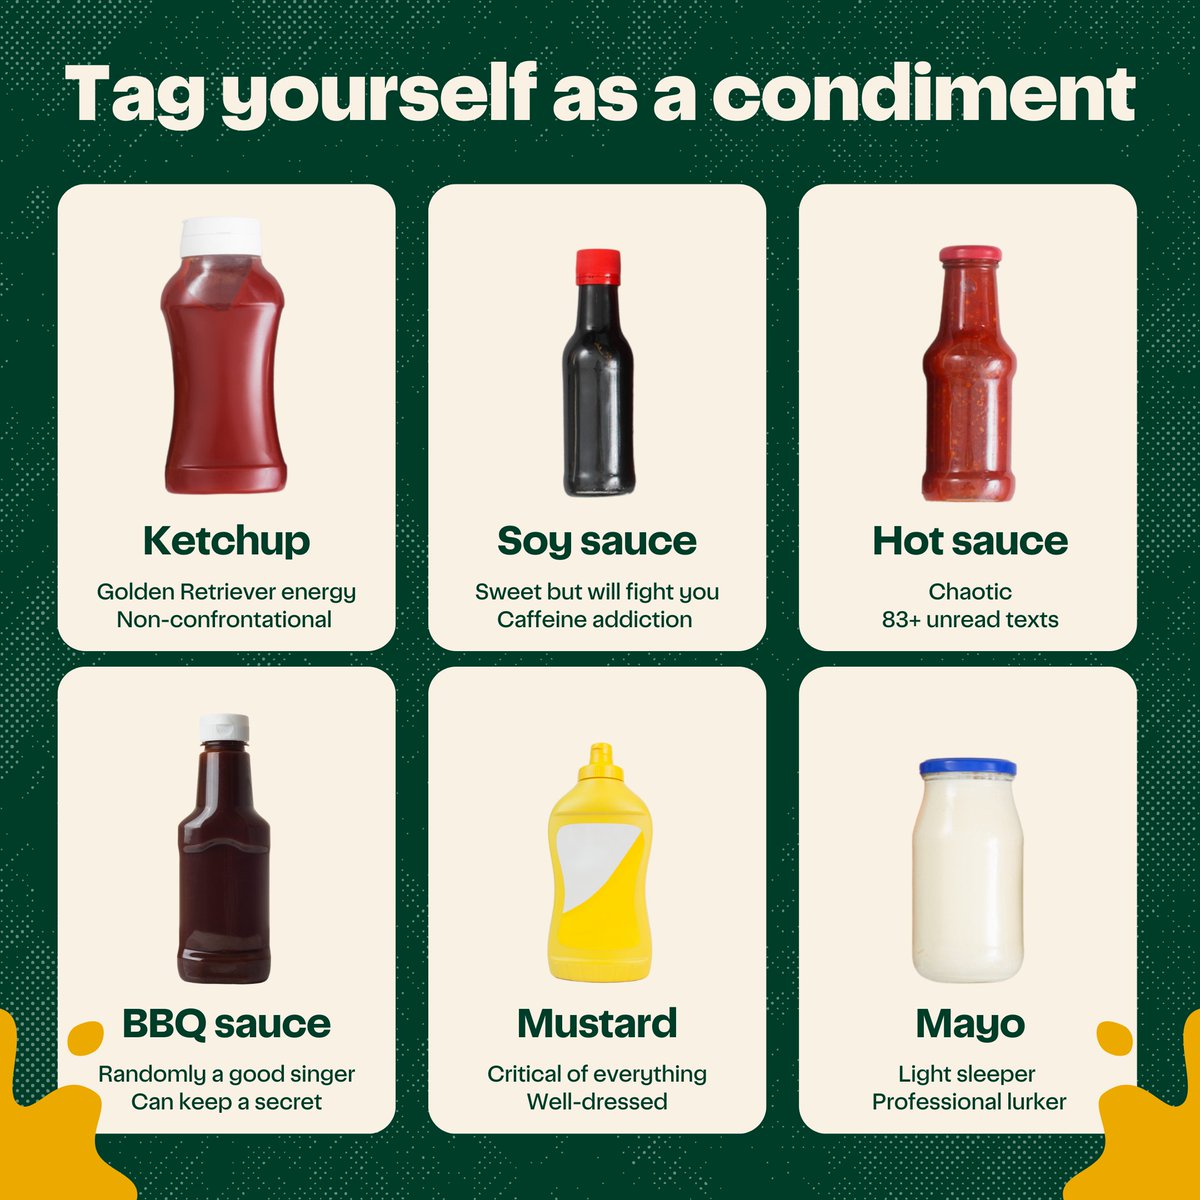 Your favorite condiments reveal more than you think. Let's uncover the tasty secrets it spills about you!